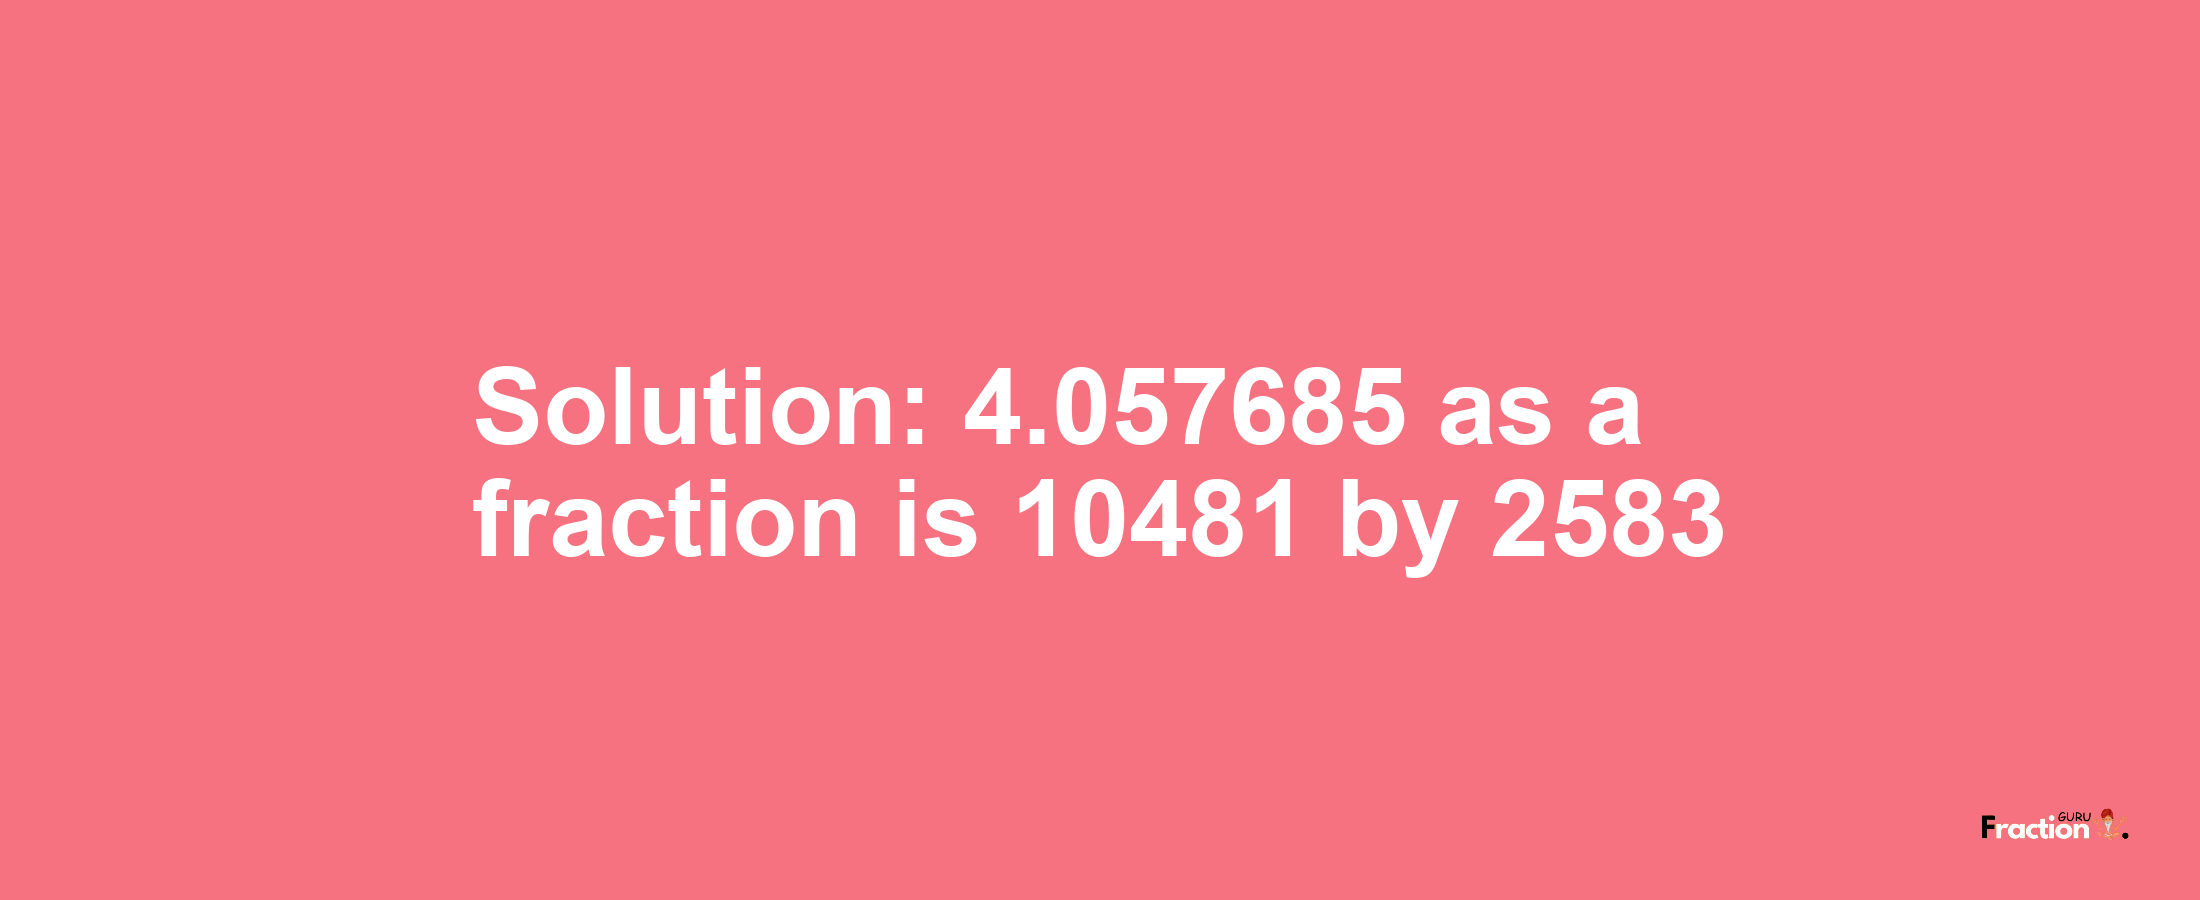 Solution:4.057685 as a fraction is 10481/2583